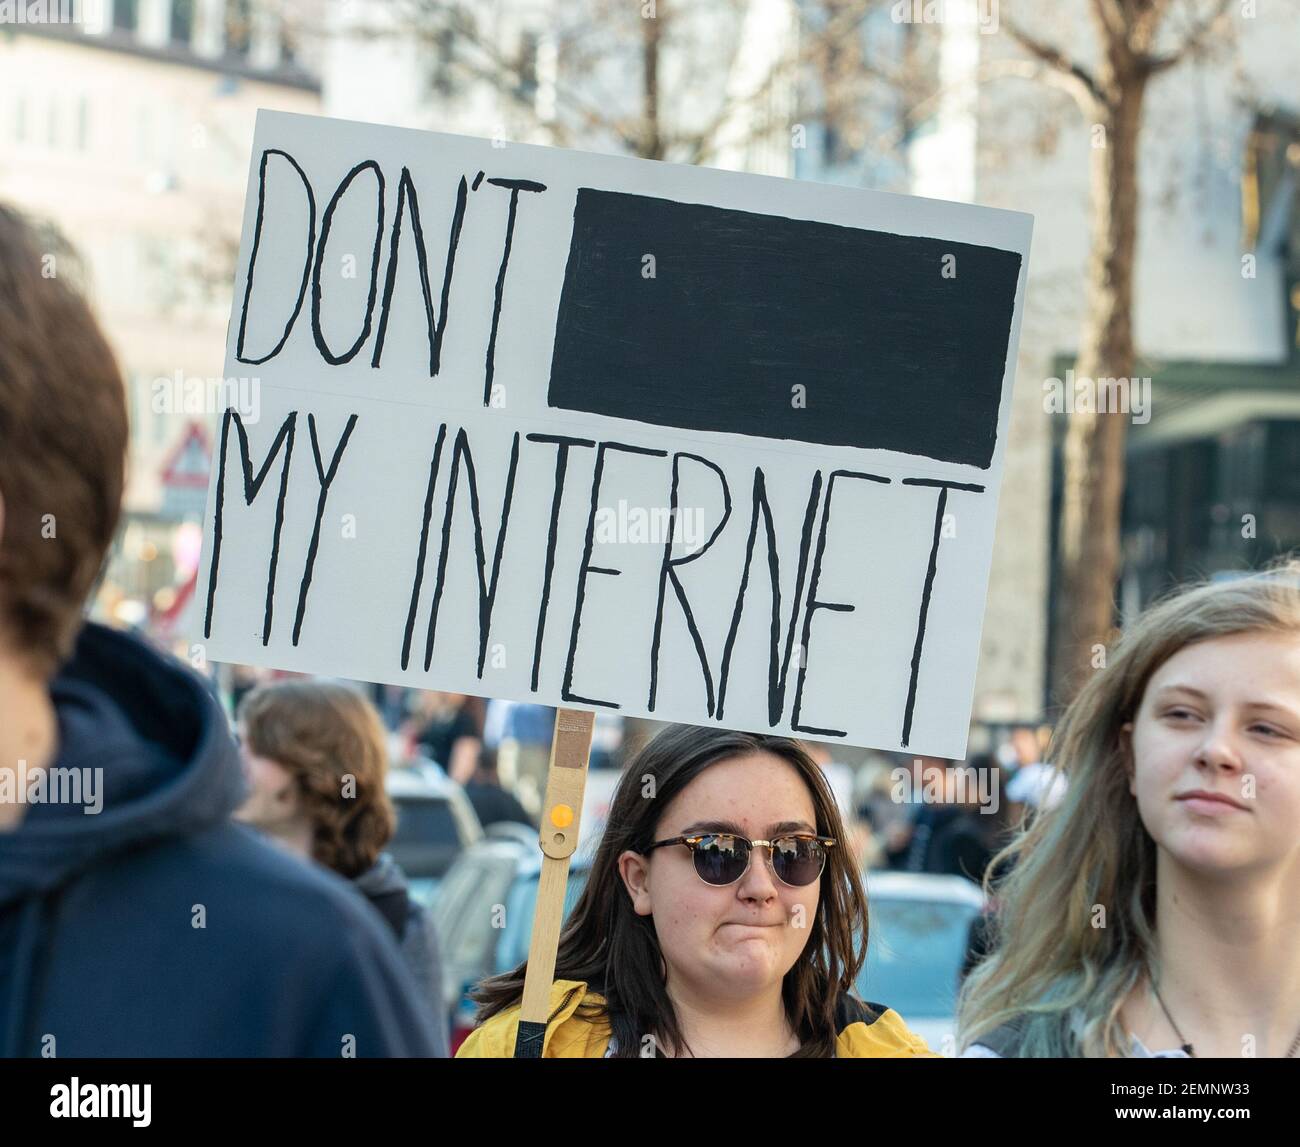 More than 50.000 people joined the Save Your Internet demonstration in Munich on 23.3.2019. The protestors demonstrated against against article 11, 12 and 13 of the copyright reform. They fear an upload filter and censorship. Furthermore critics say, that the reform could be also bad for creatives. (Photo by Alexander Pohl/Sipa USA) Stock Photo